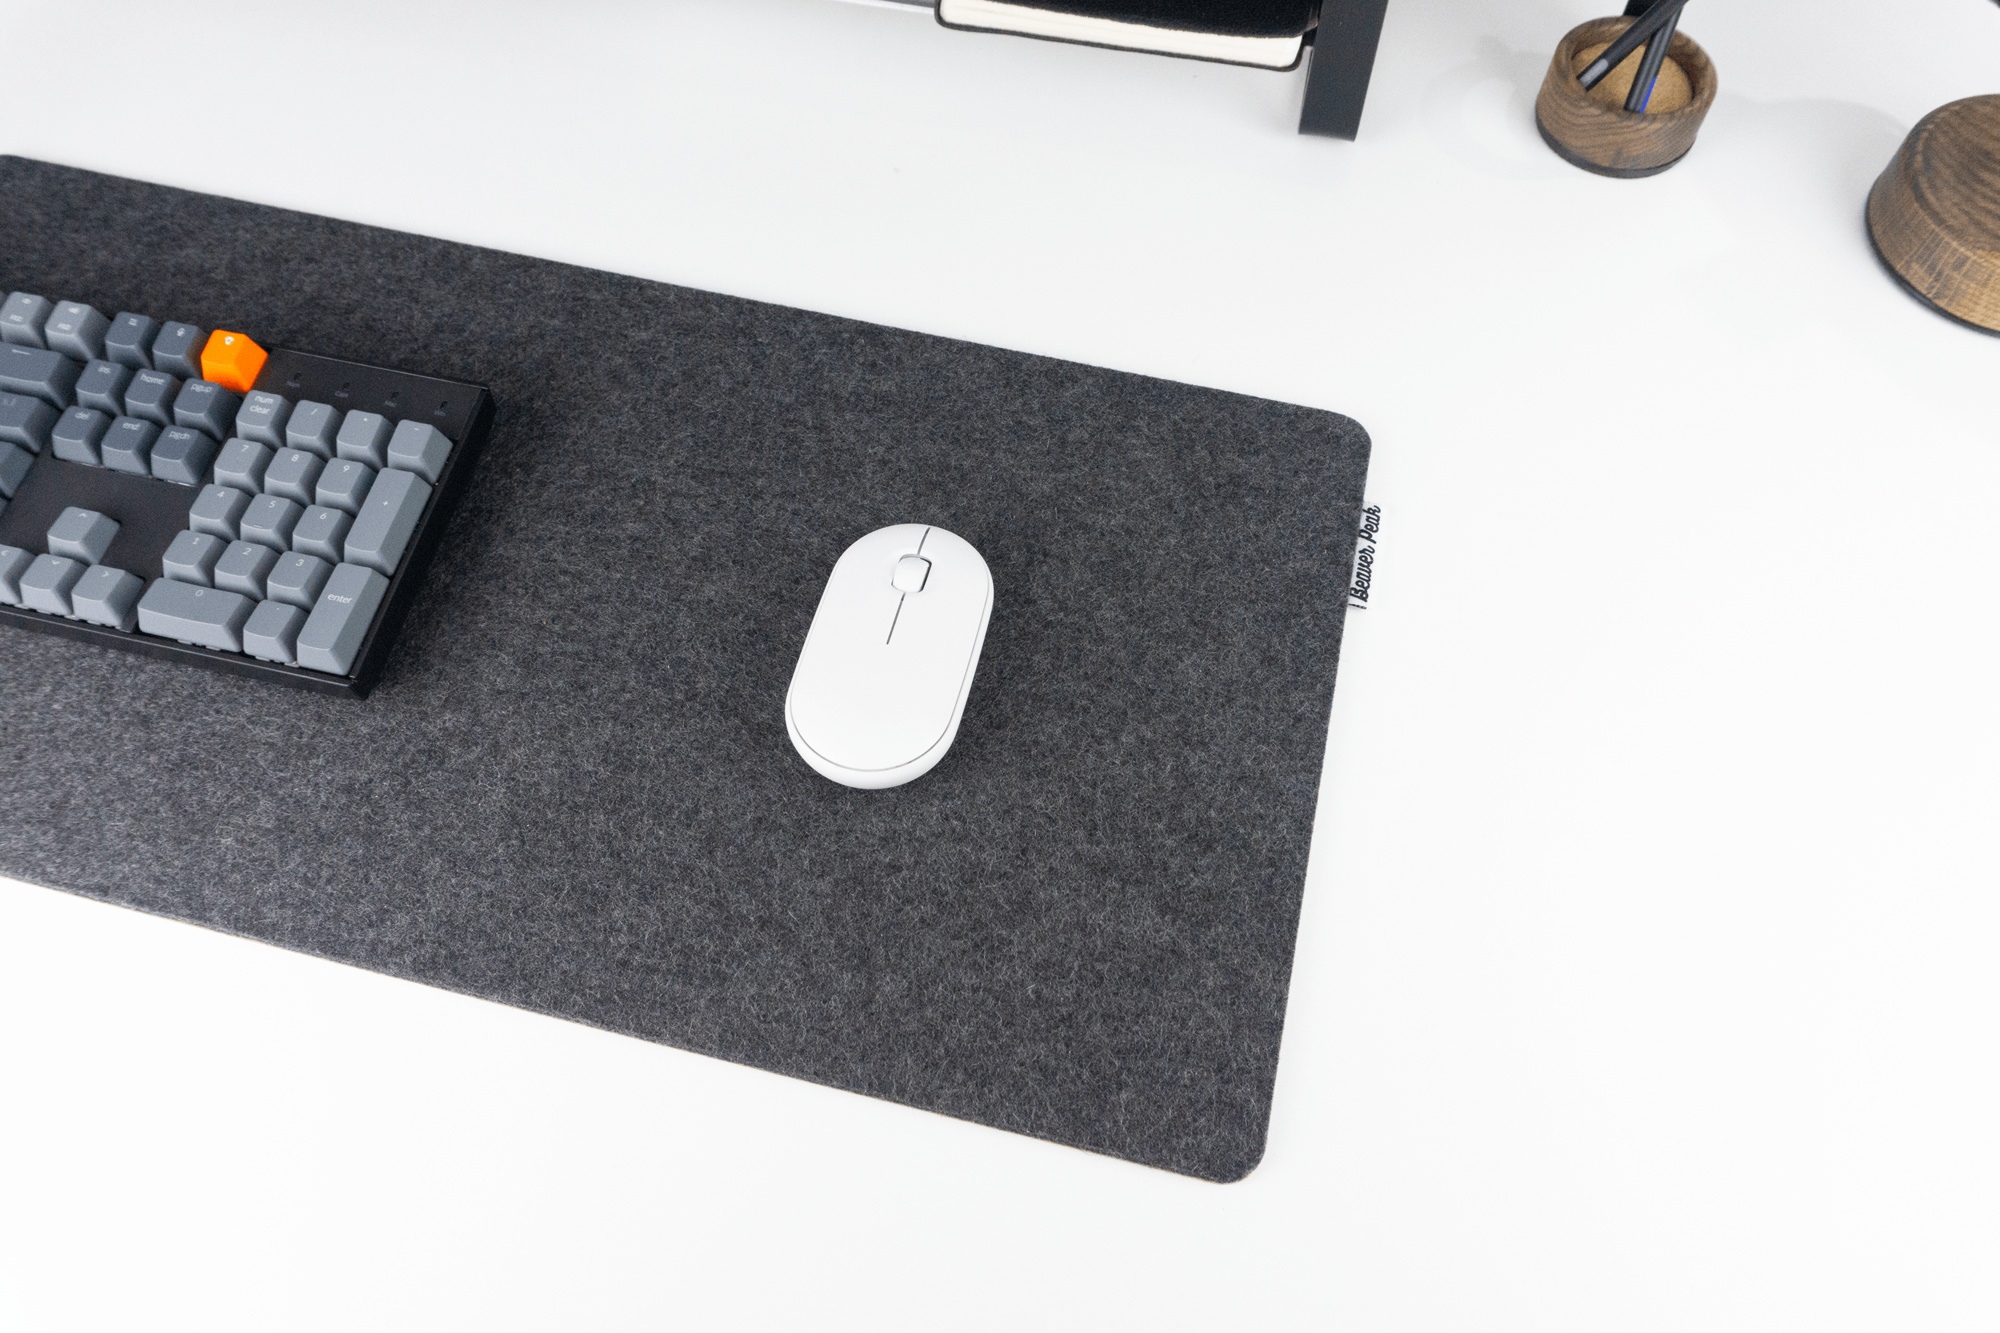 Black wool and cork desk pad with white mouse and mechanical keyboard on top. The wool desk pad is on a standing desk and has a BeaverPeak logo tag protruding from the right side of the mat.